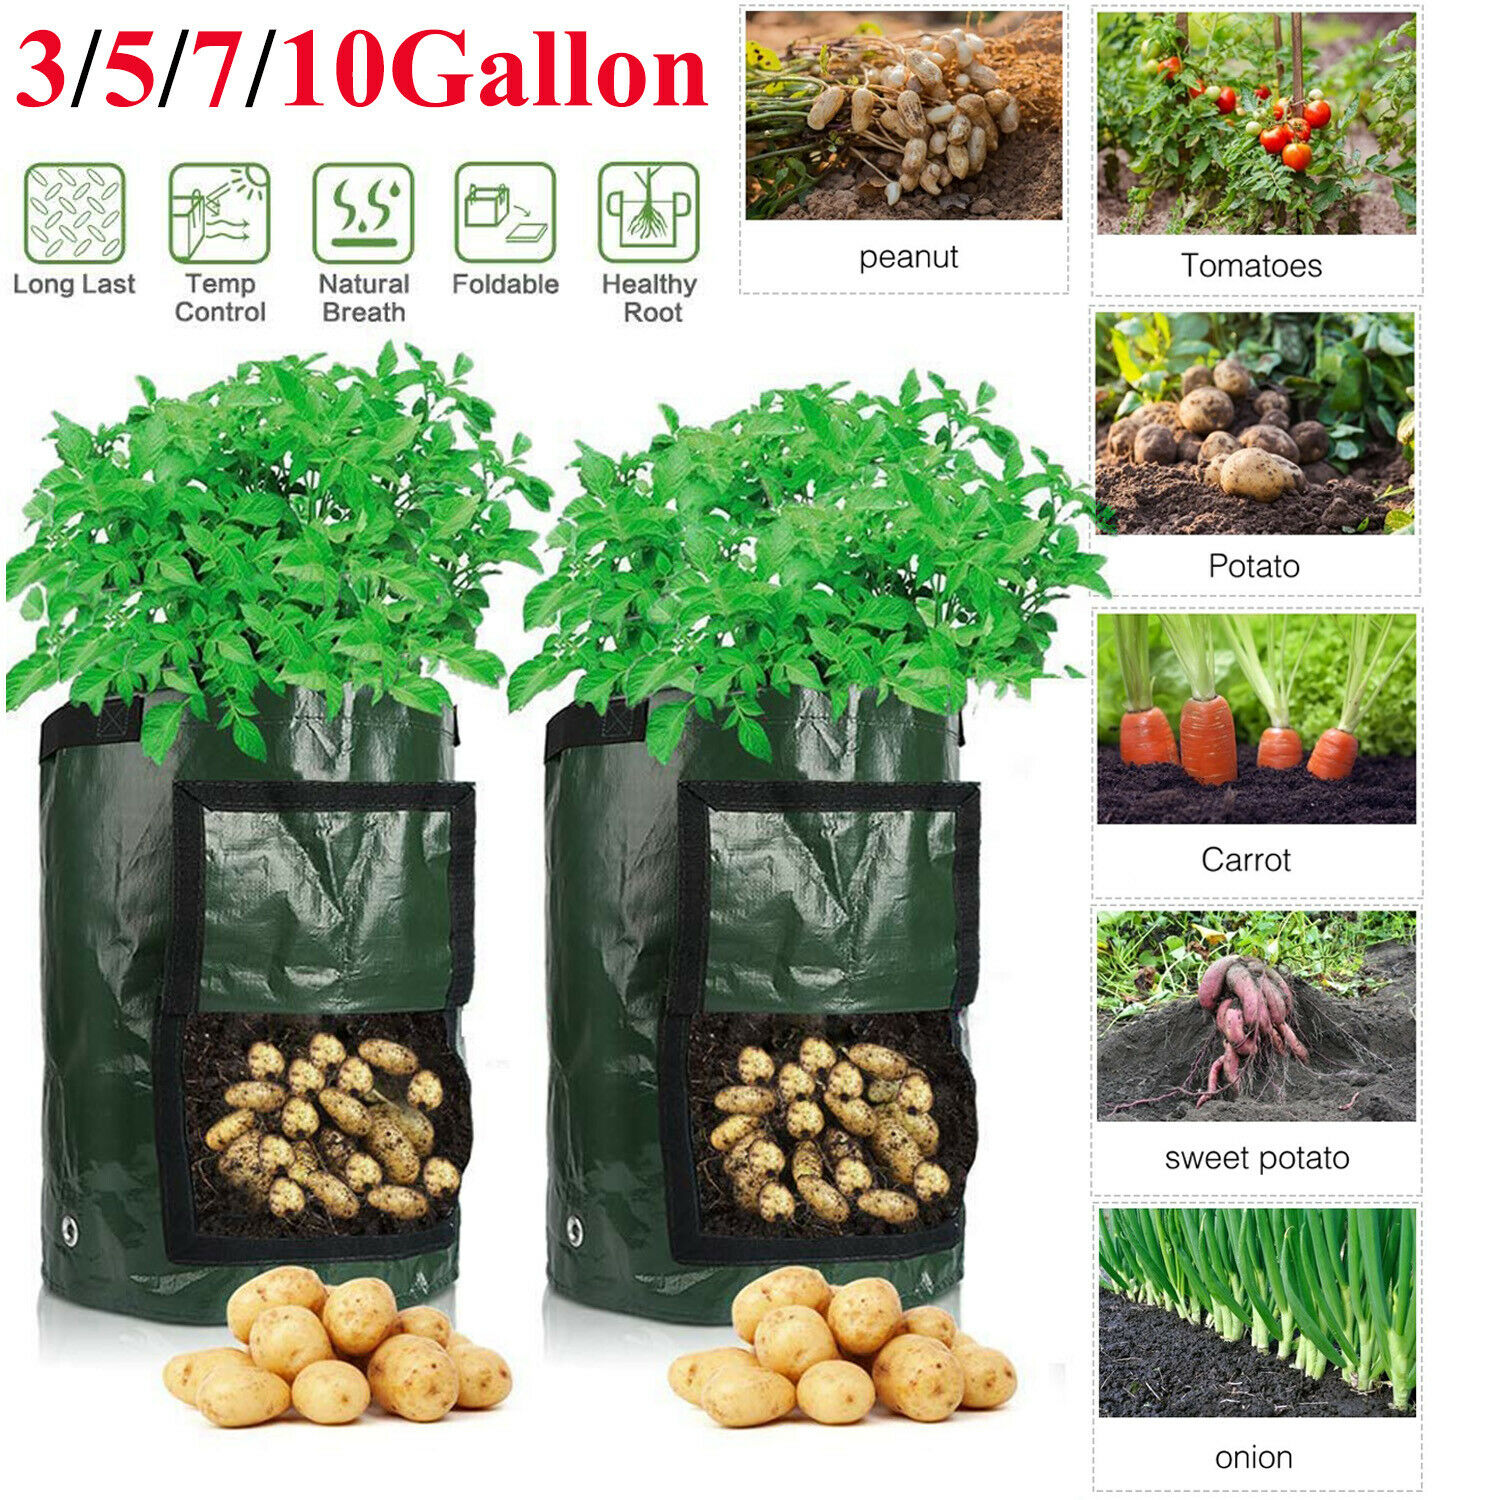 Potato Grow Bags Planters Outdoor Garden Vegetable Tomato Plant Containers Pots - image 1 of 13